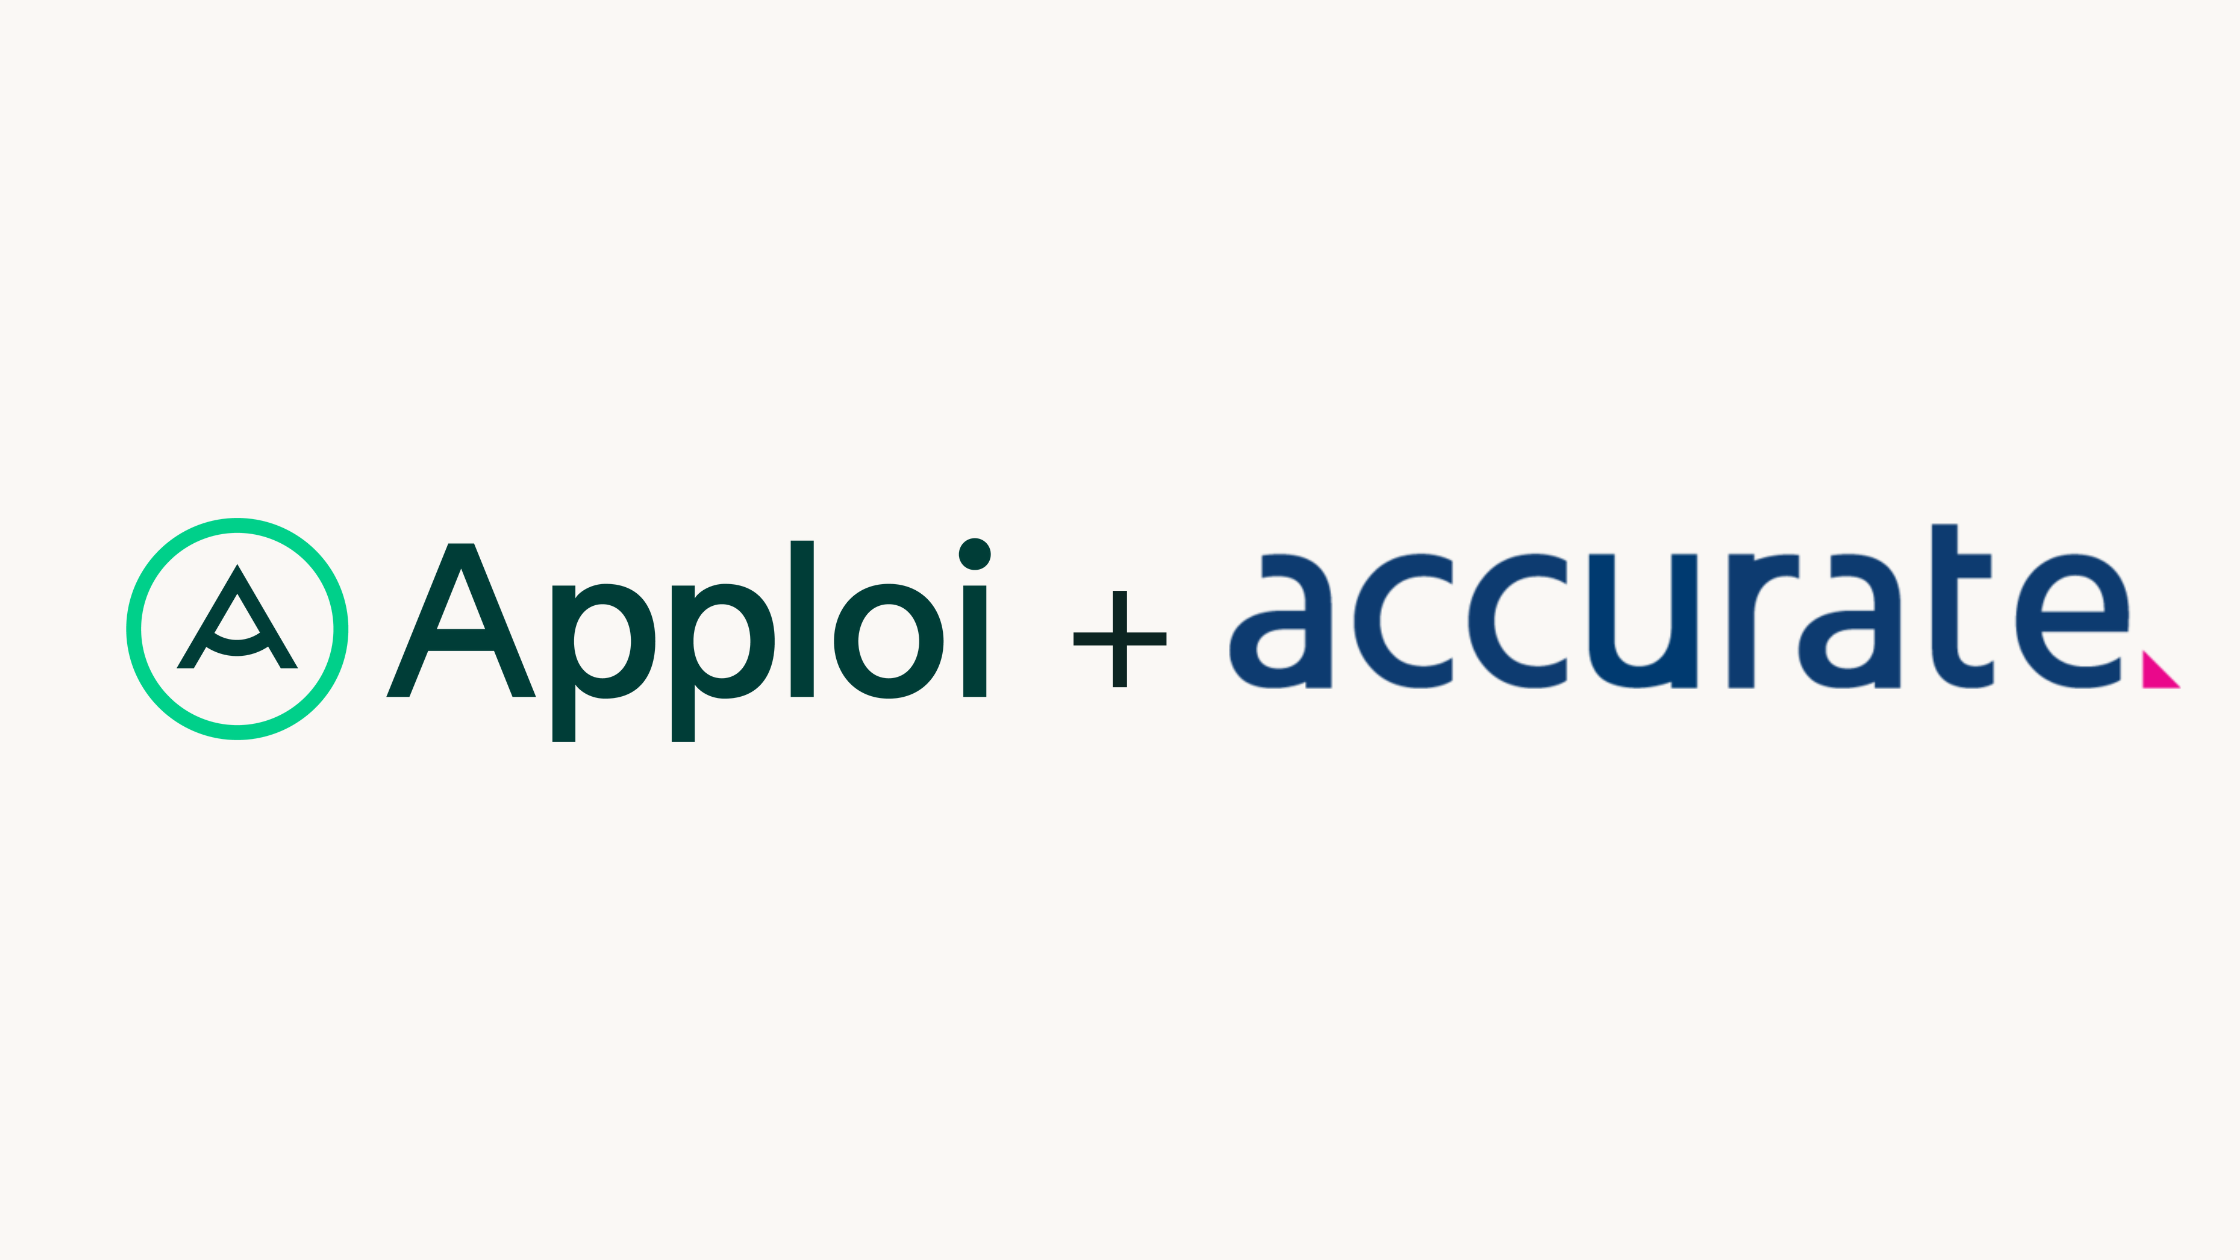 Apploi Partners With Background Check Platform Accurate to Improve Healthcare Hiring